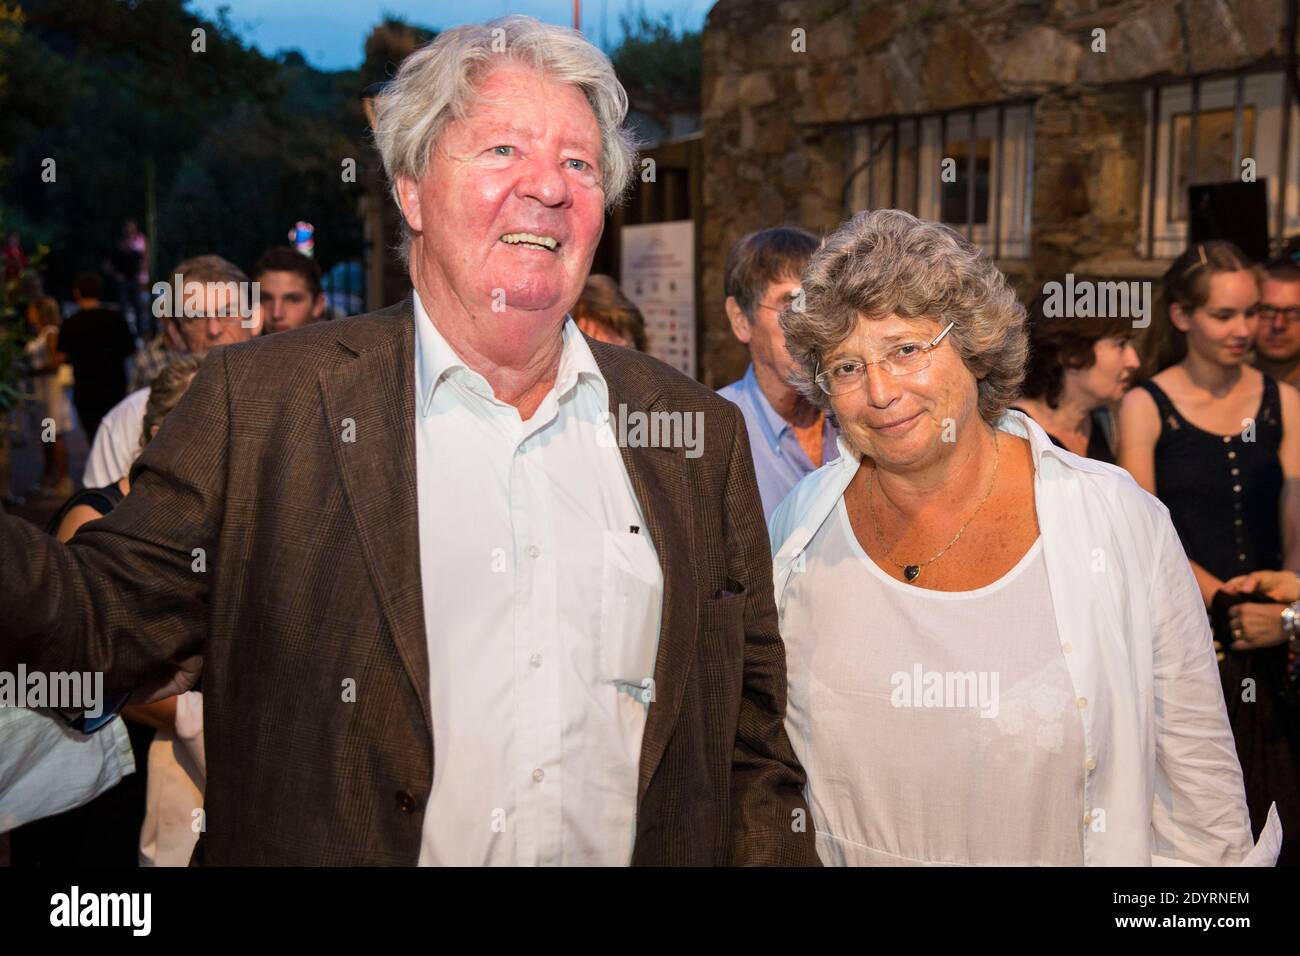 Cartoonist Sempe and festival director Jacqueline Franjou pose during the 29th Festival de Ramatuelle theatre festival, in Ramatuelle, southern France on August 7, 2013. Photo by Cyril Bruneau/ABACAPRESS.COM Stock Photo